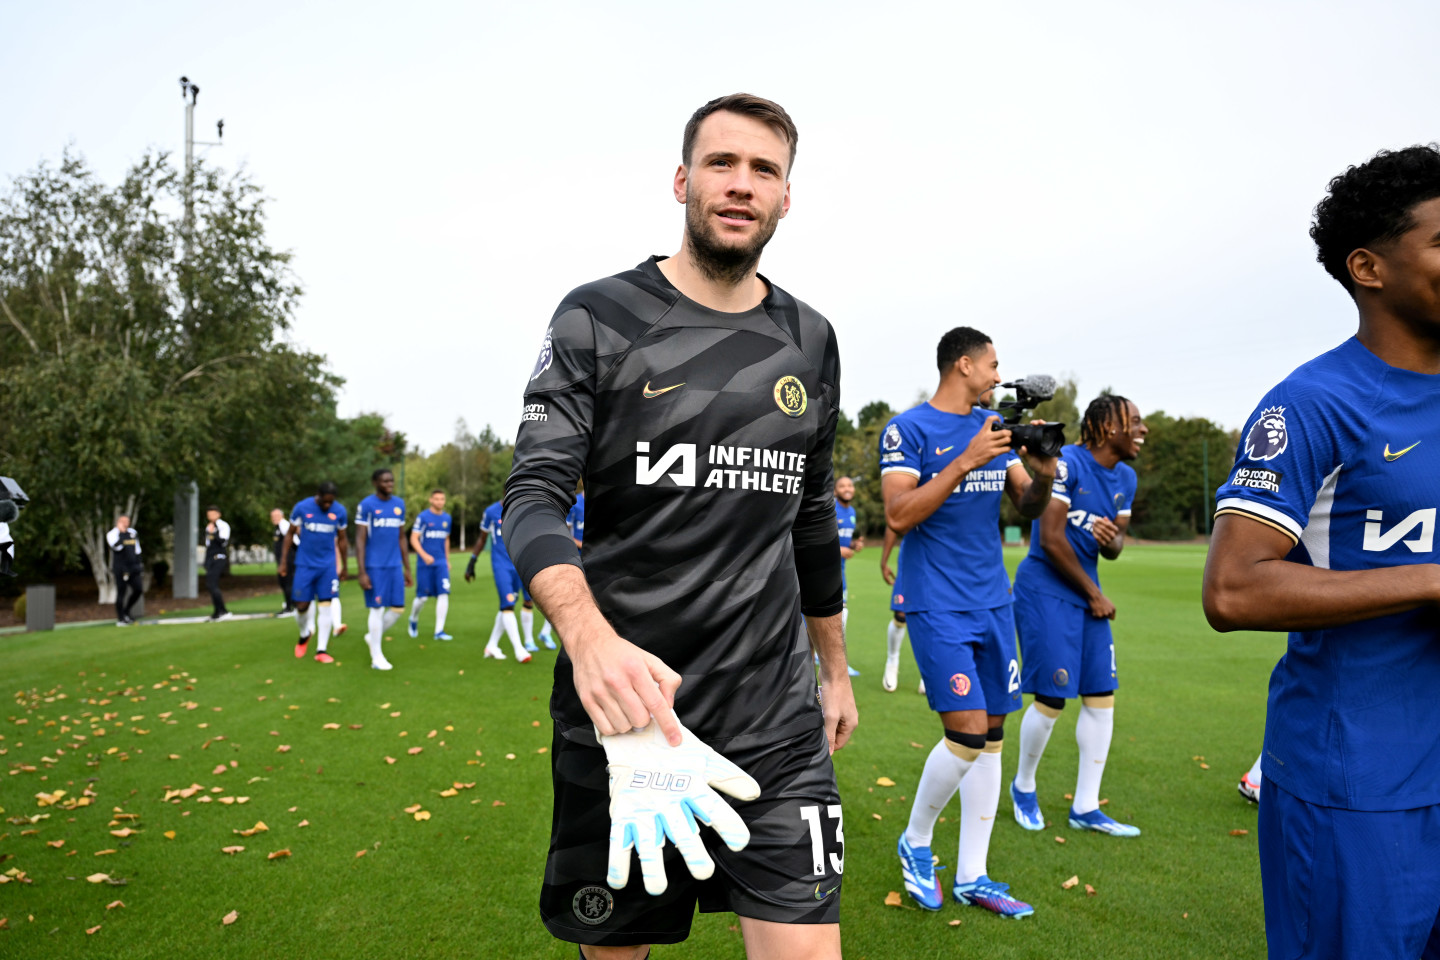 Chelsea boss Mauricio Pochettino says Marcus Bettinelli does a 'fantastic job' helping young talent.